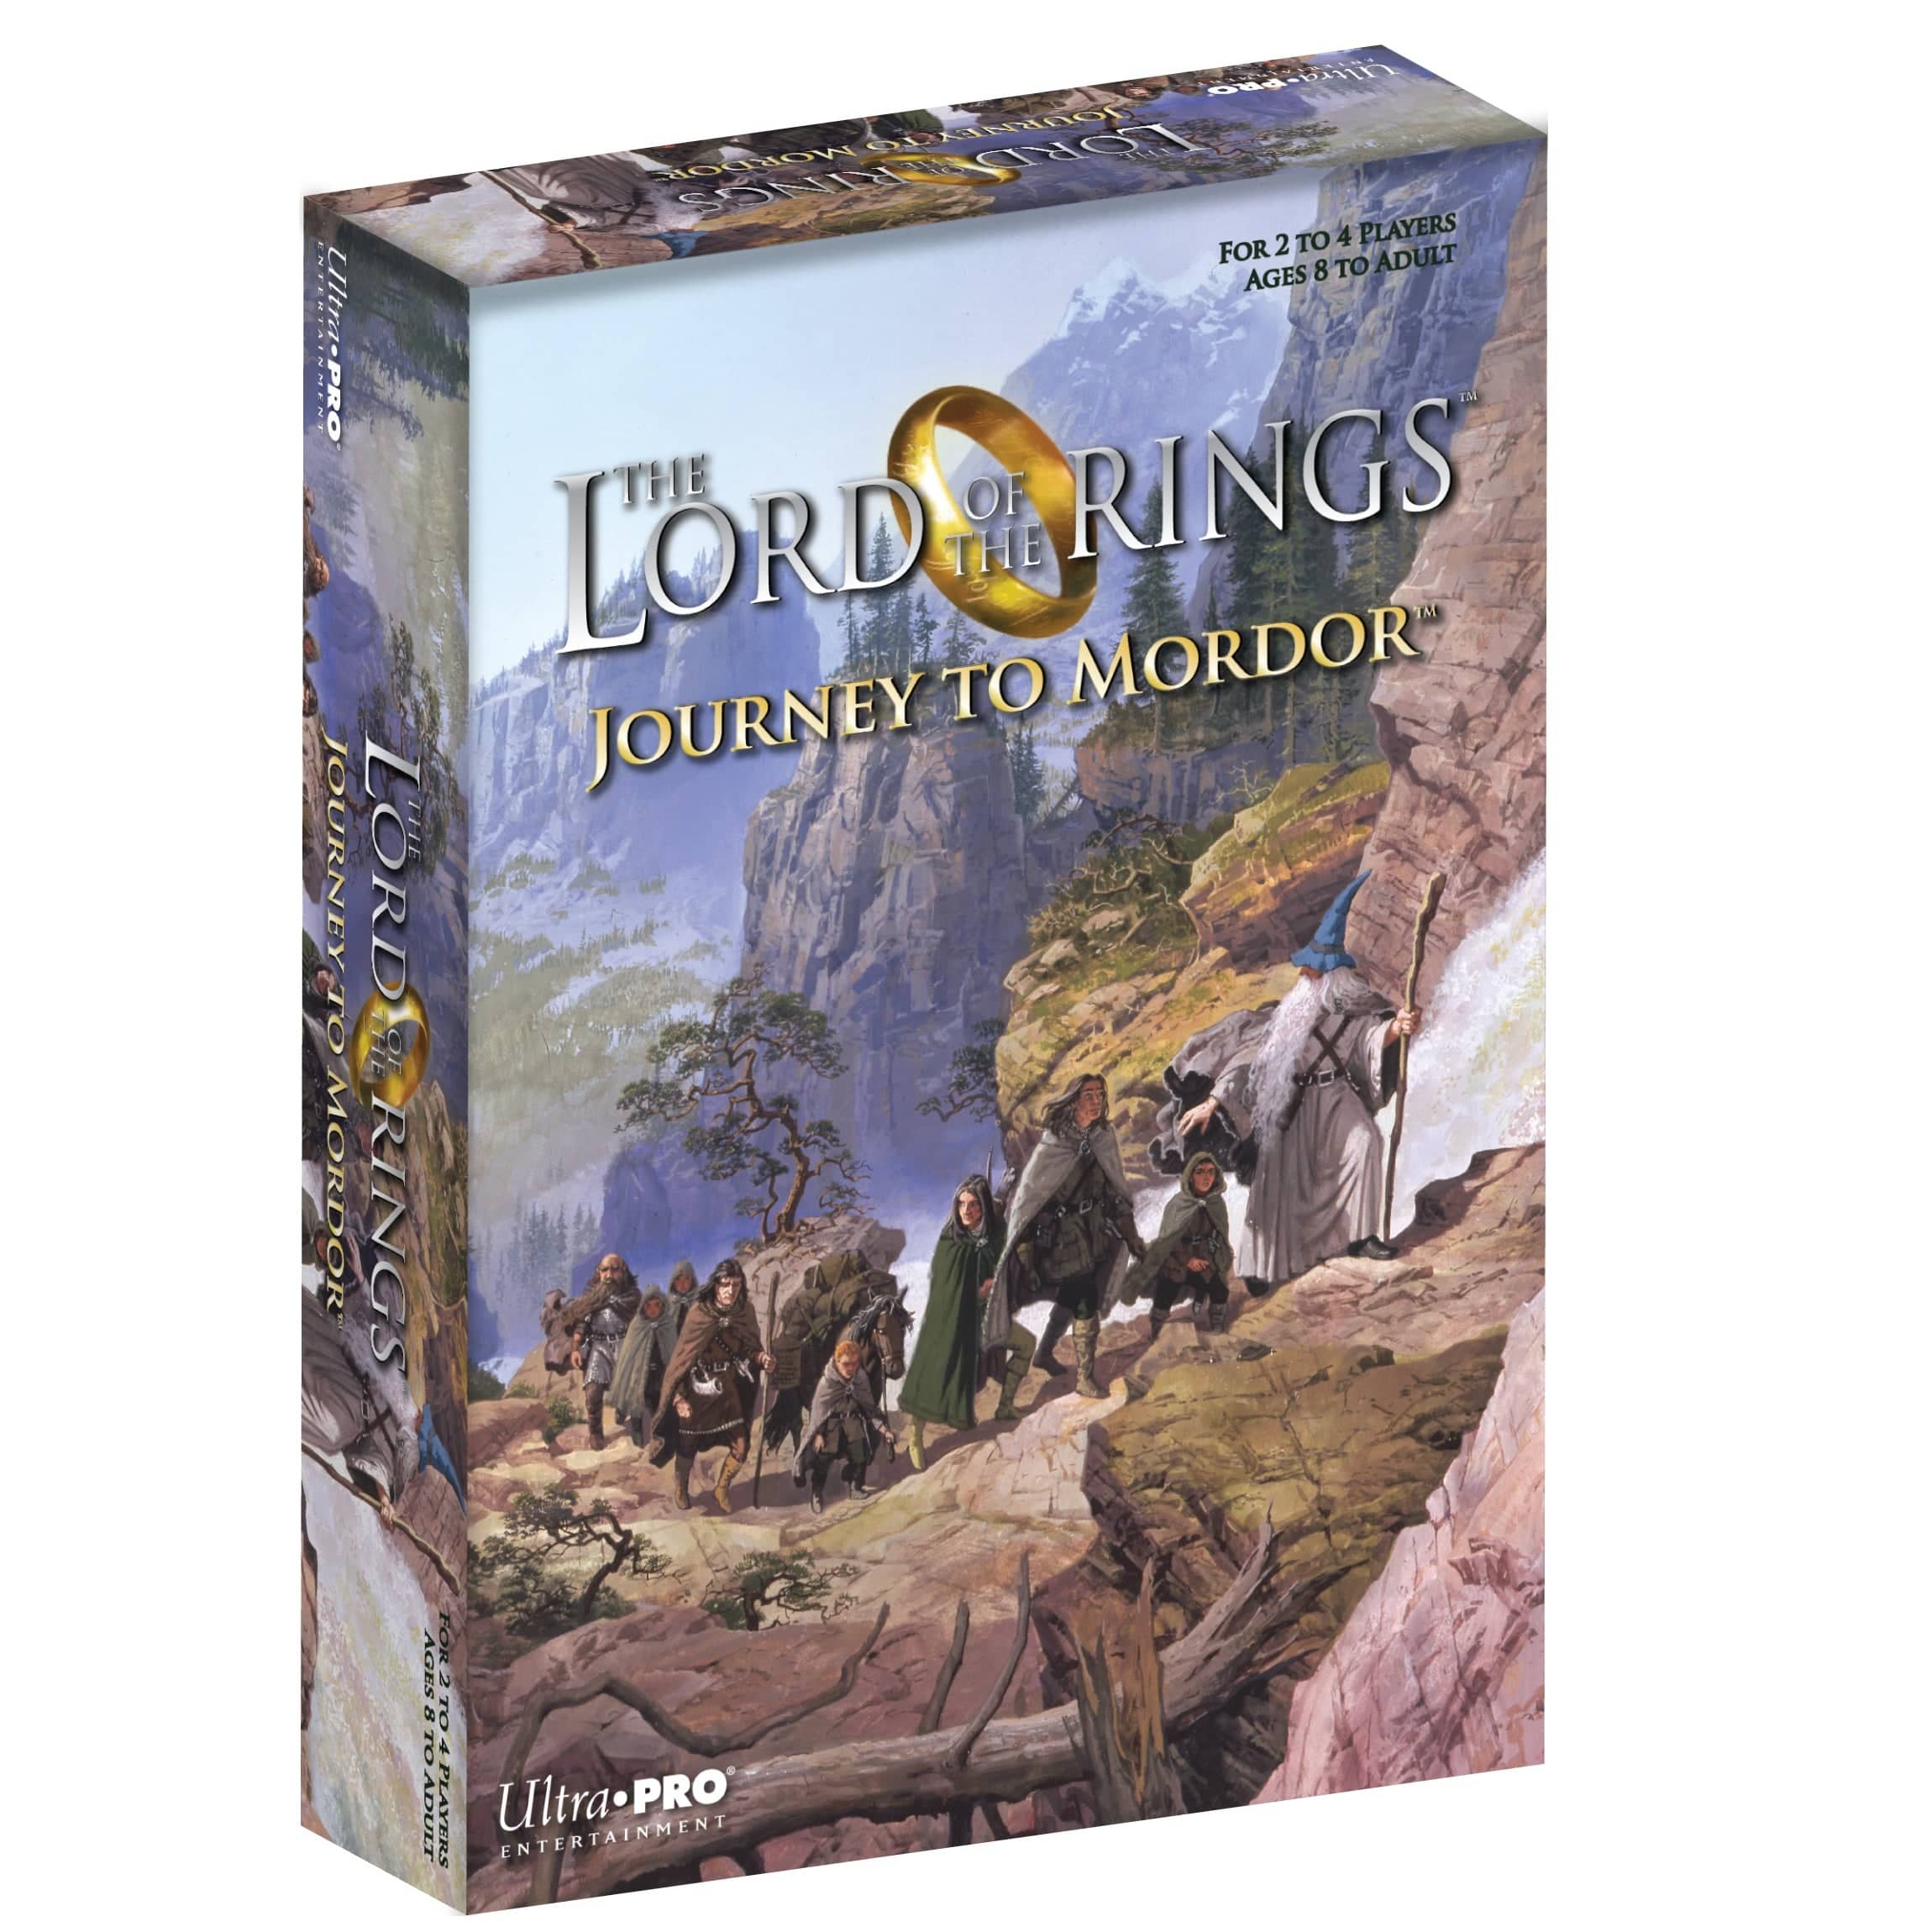 The Lord of the Rings: Journey to Mordor Dice Game | Ultra PRO Entertainment